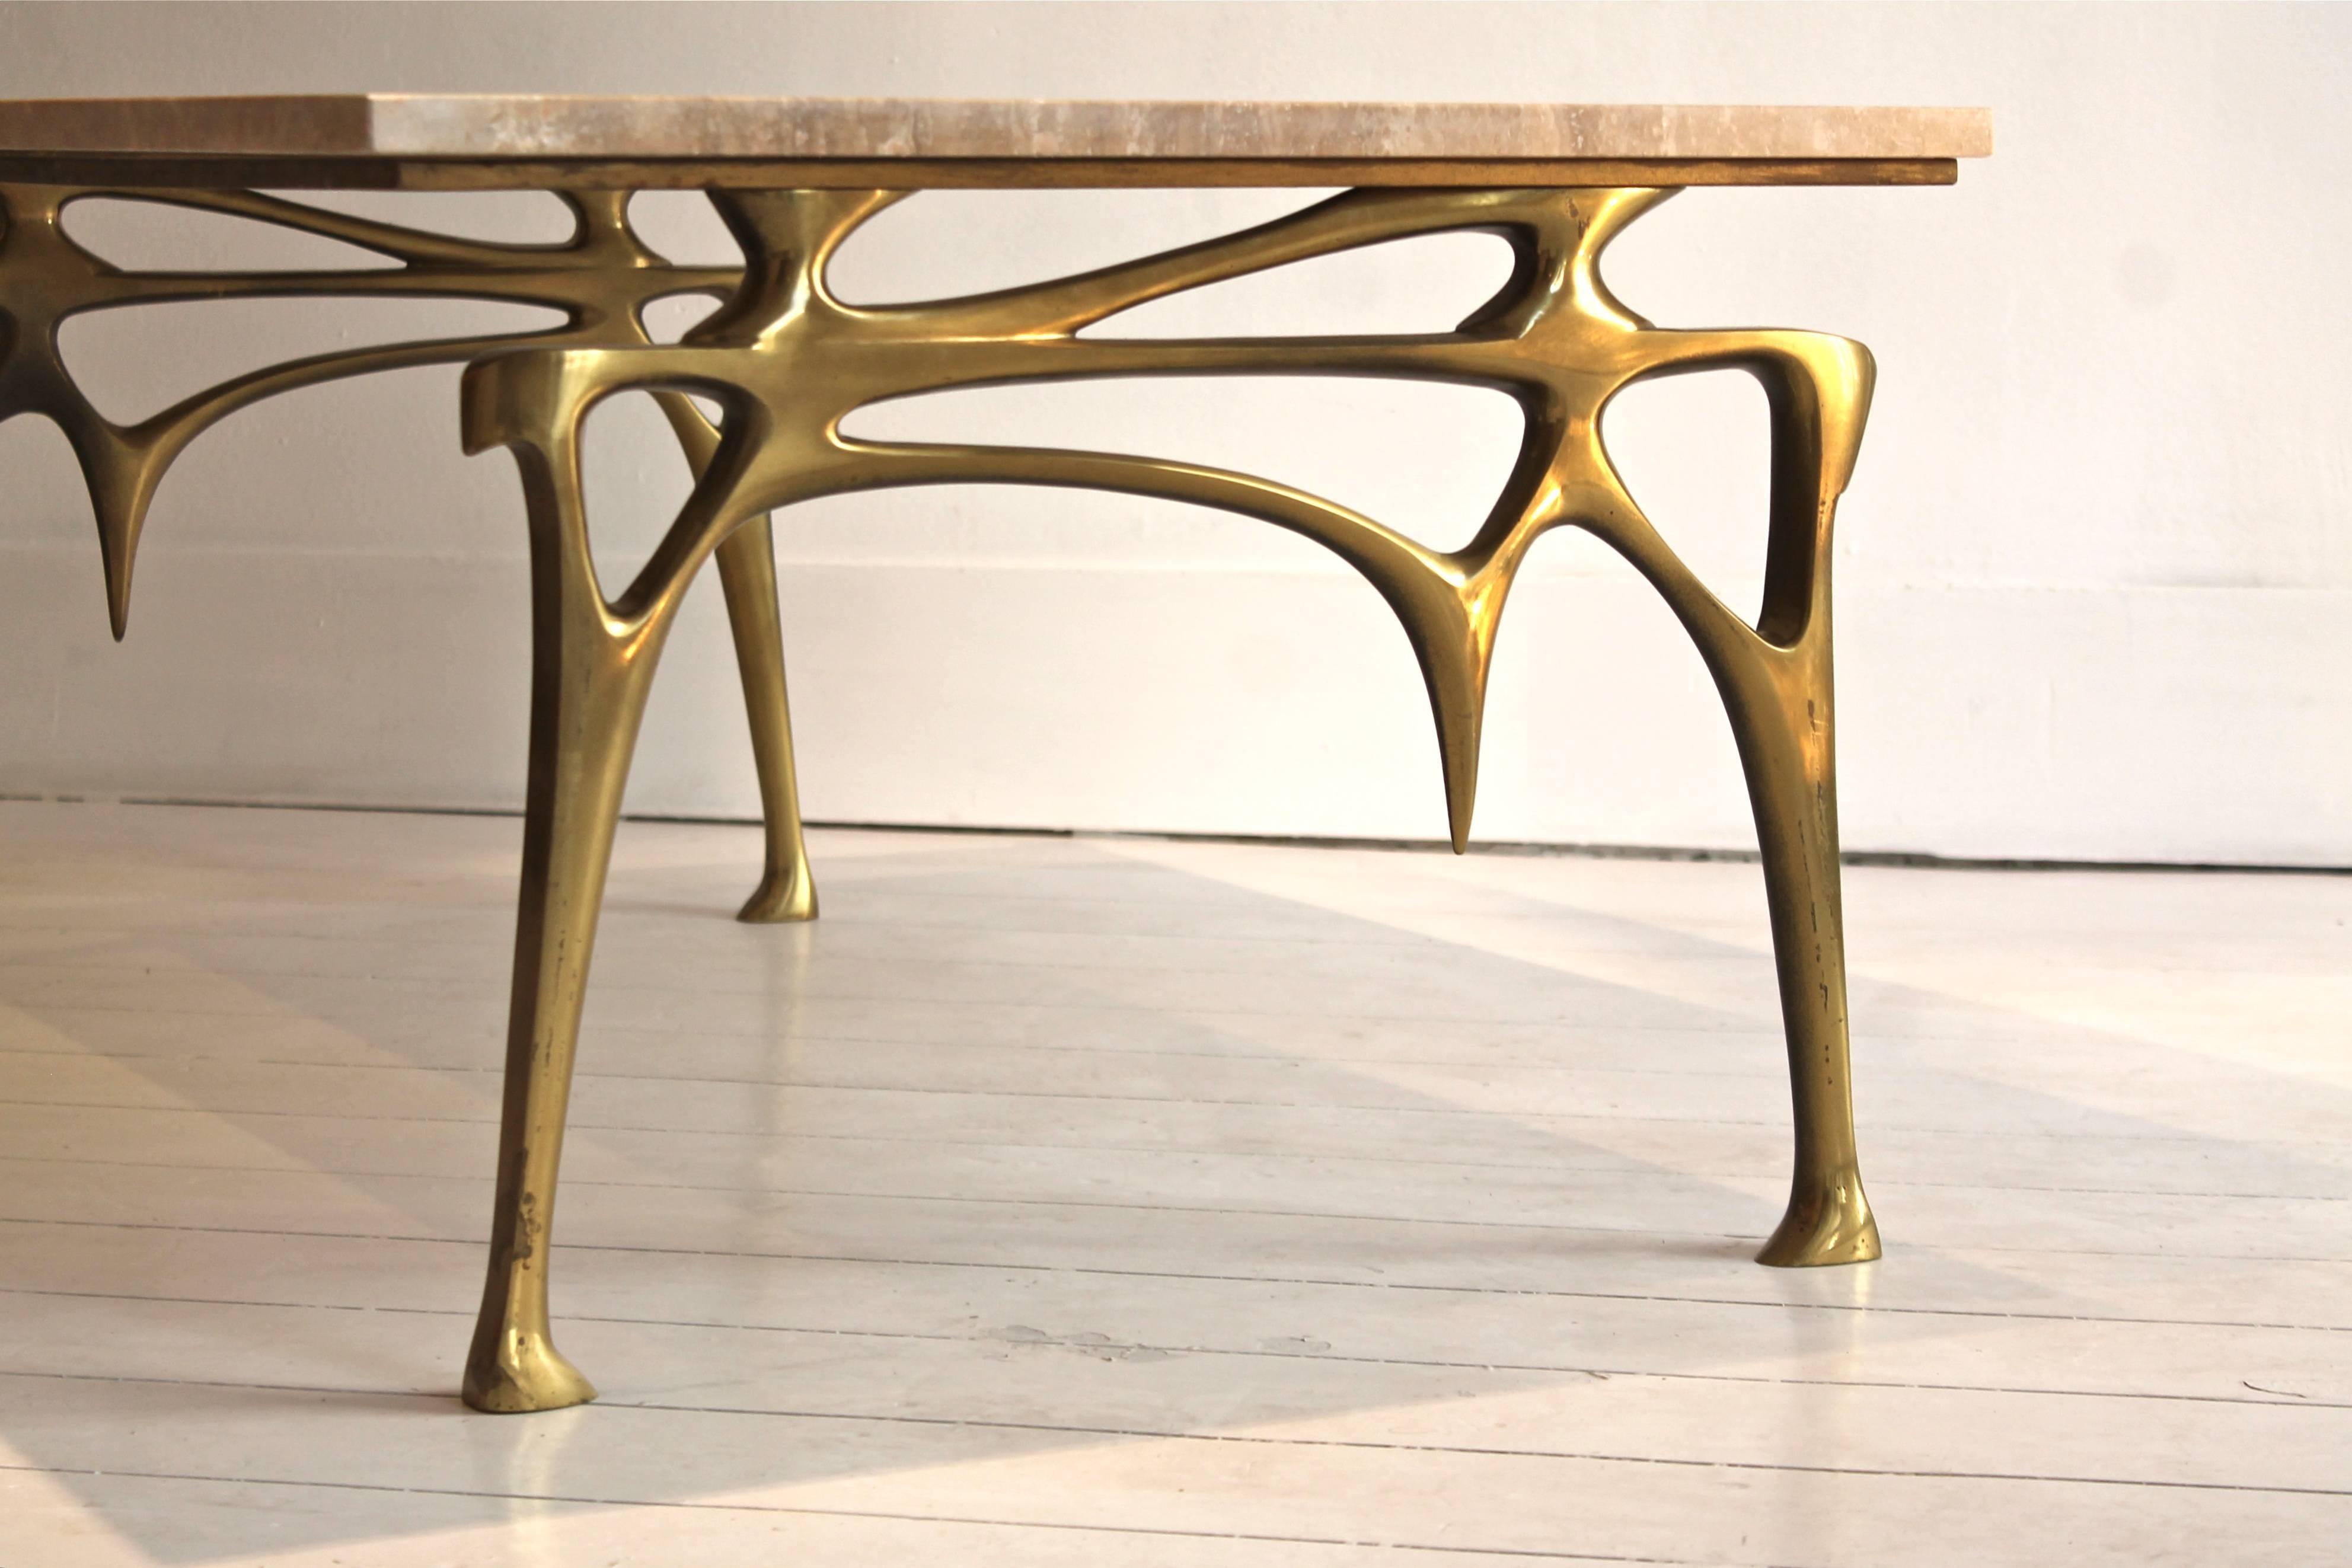 Late 20th Century 1970s Gilt Bronze and Travertine Coffee Table Signed, Belgian Artist Willy Daro